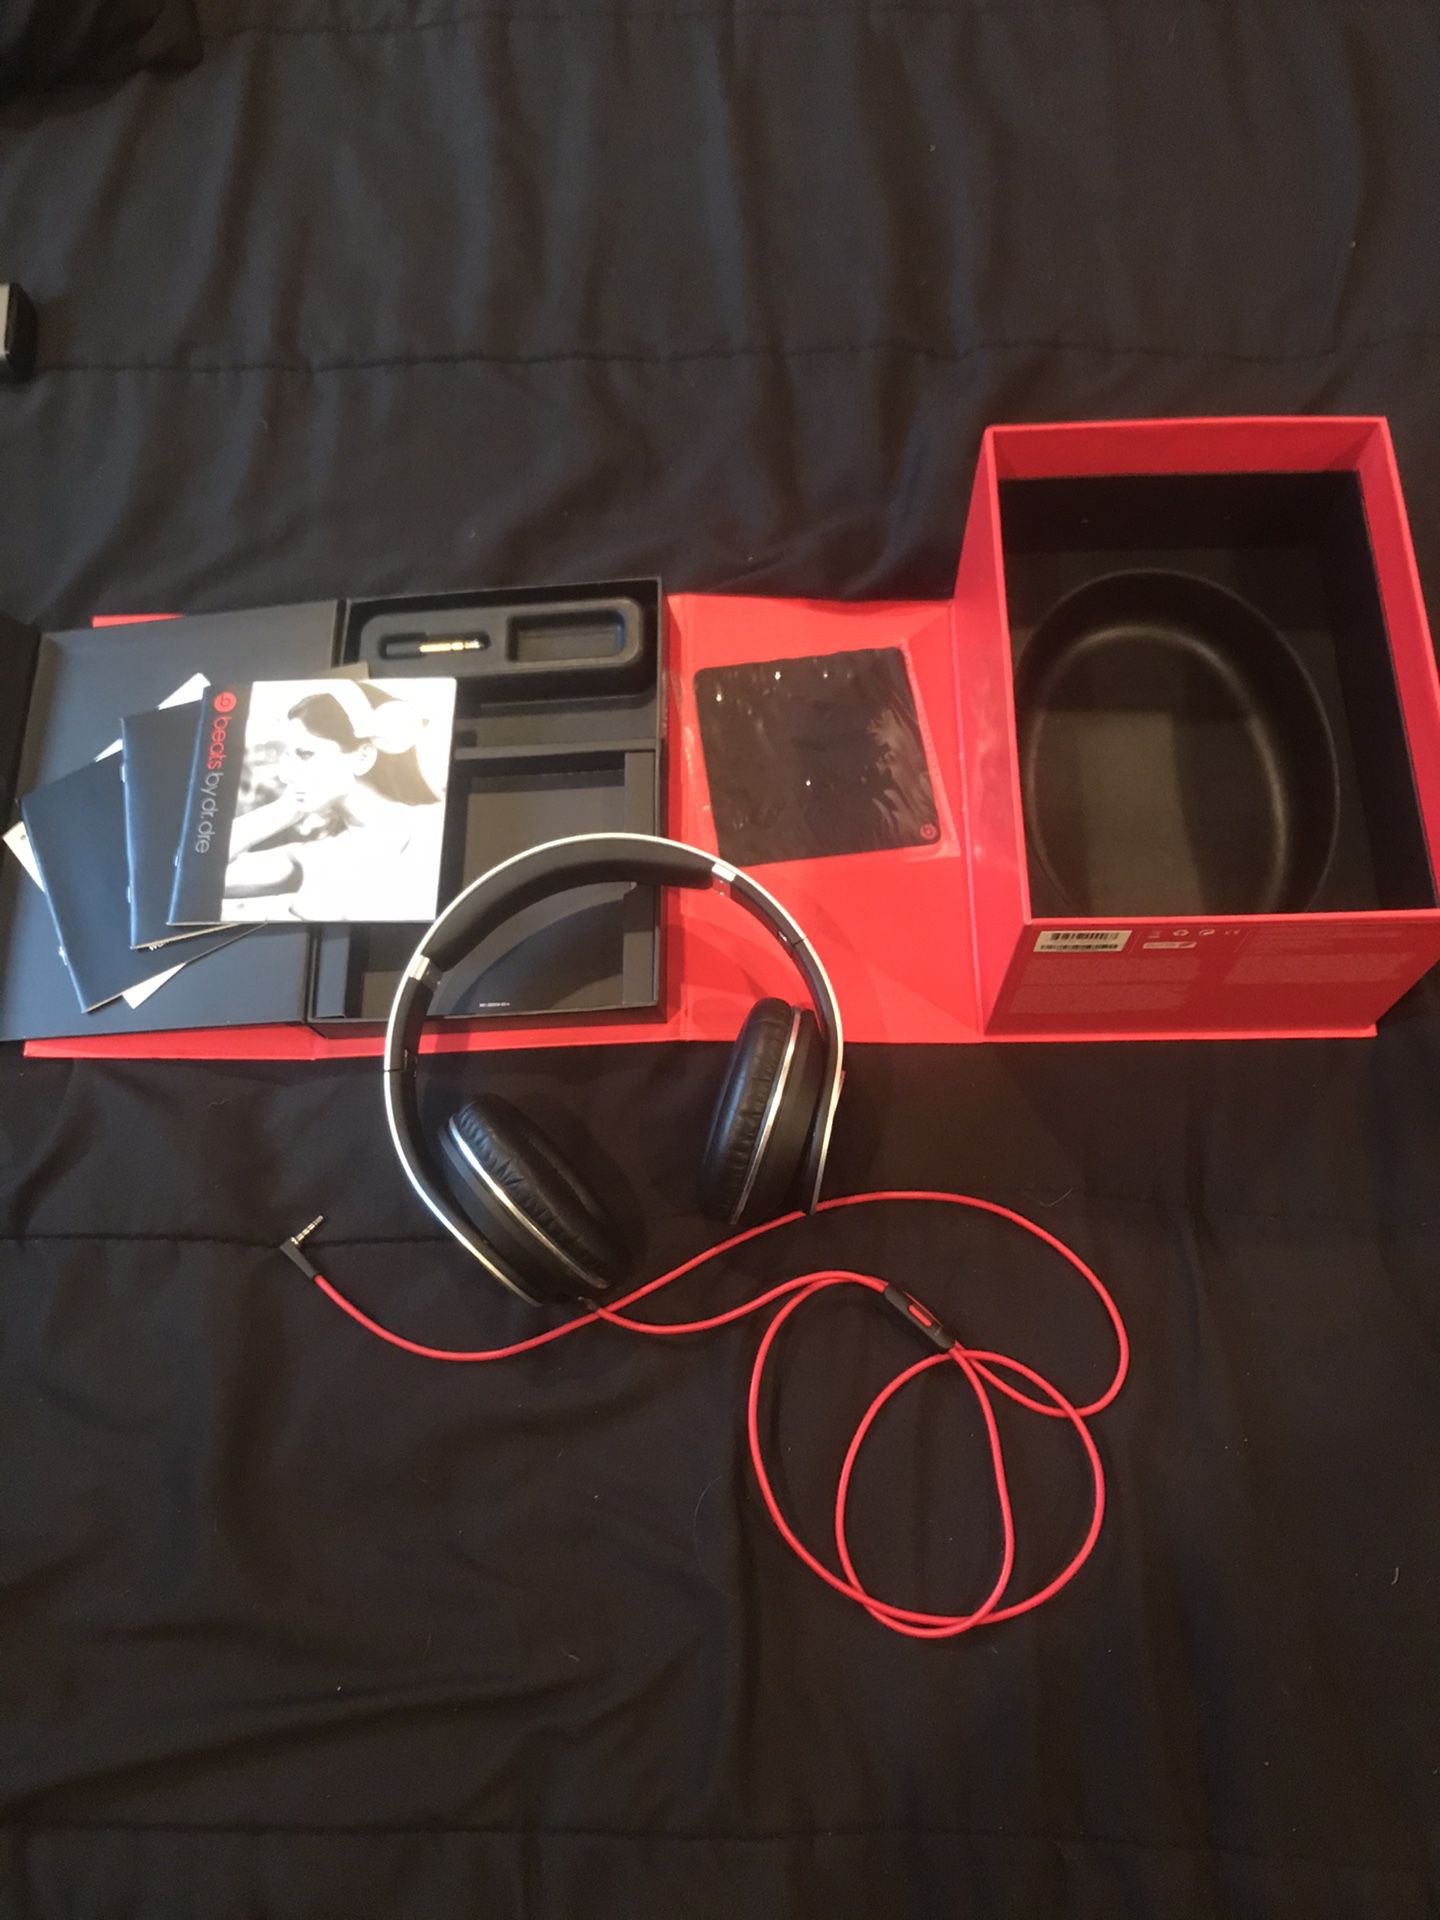 2.0 Studio Beats By Dre Wired